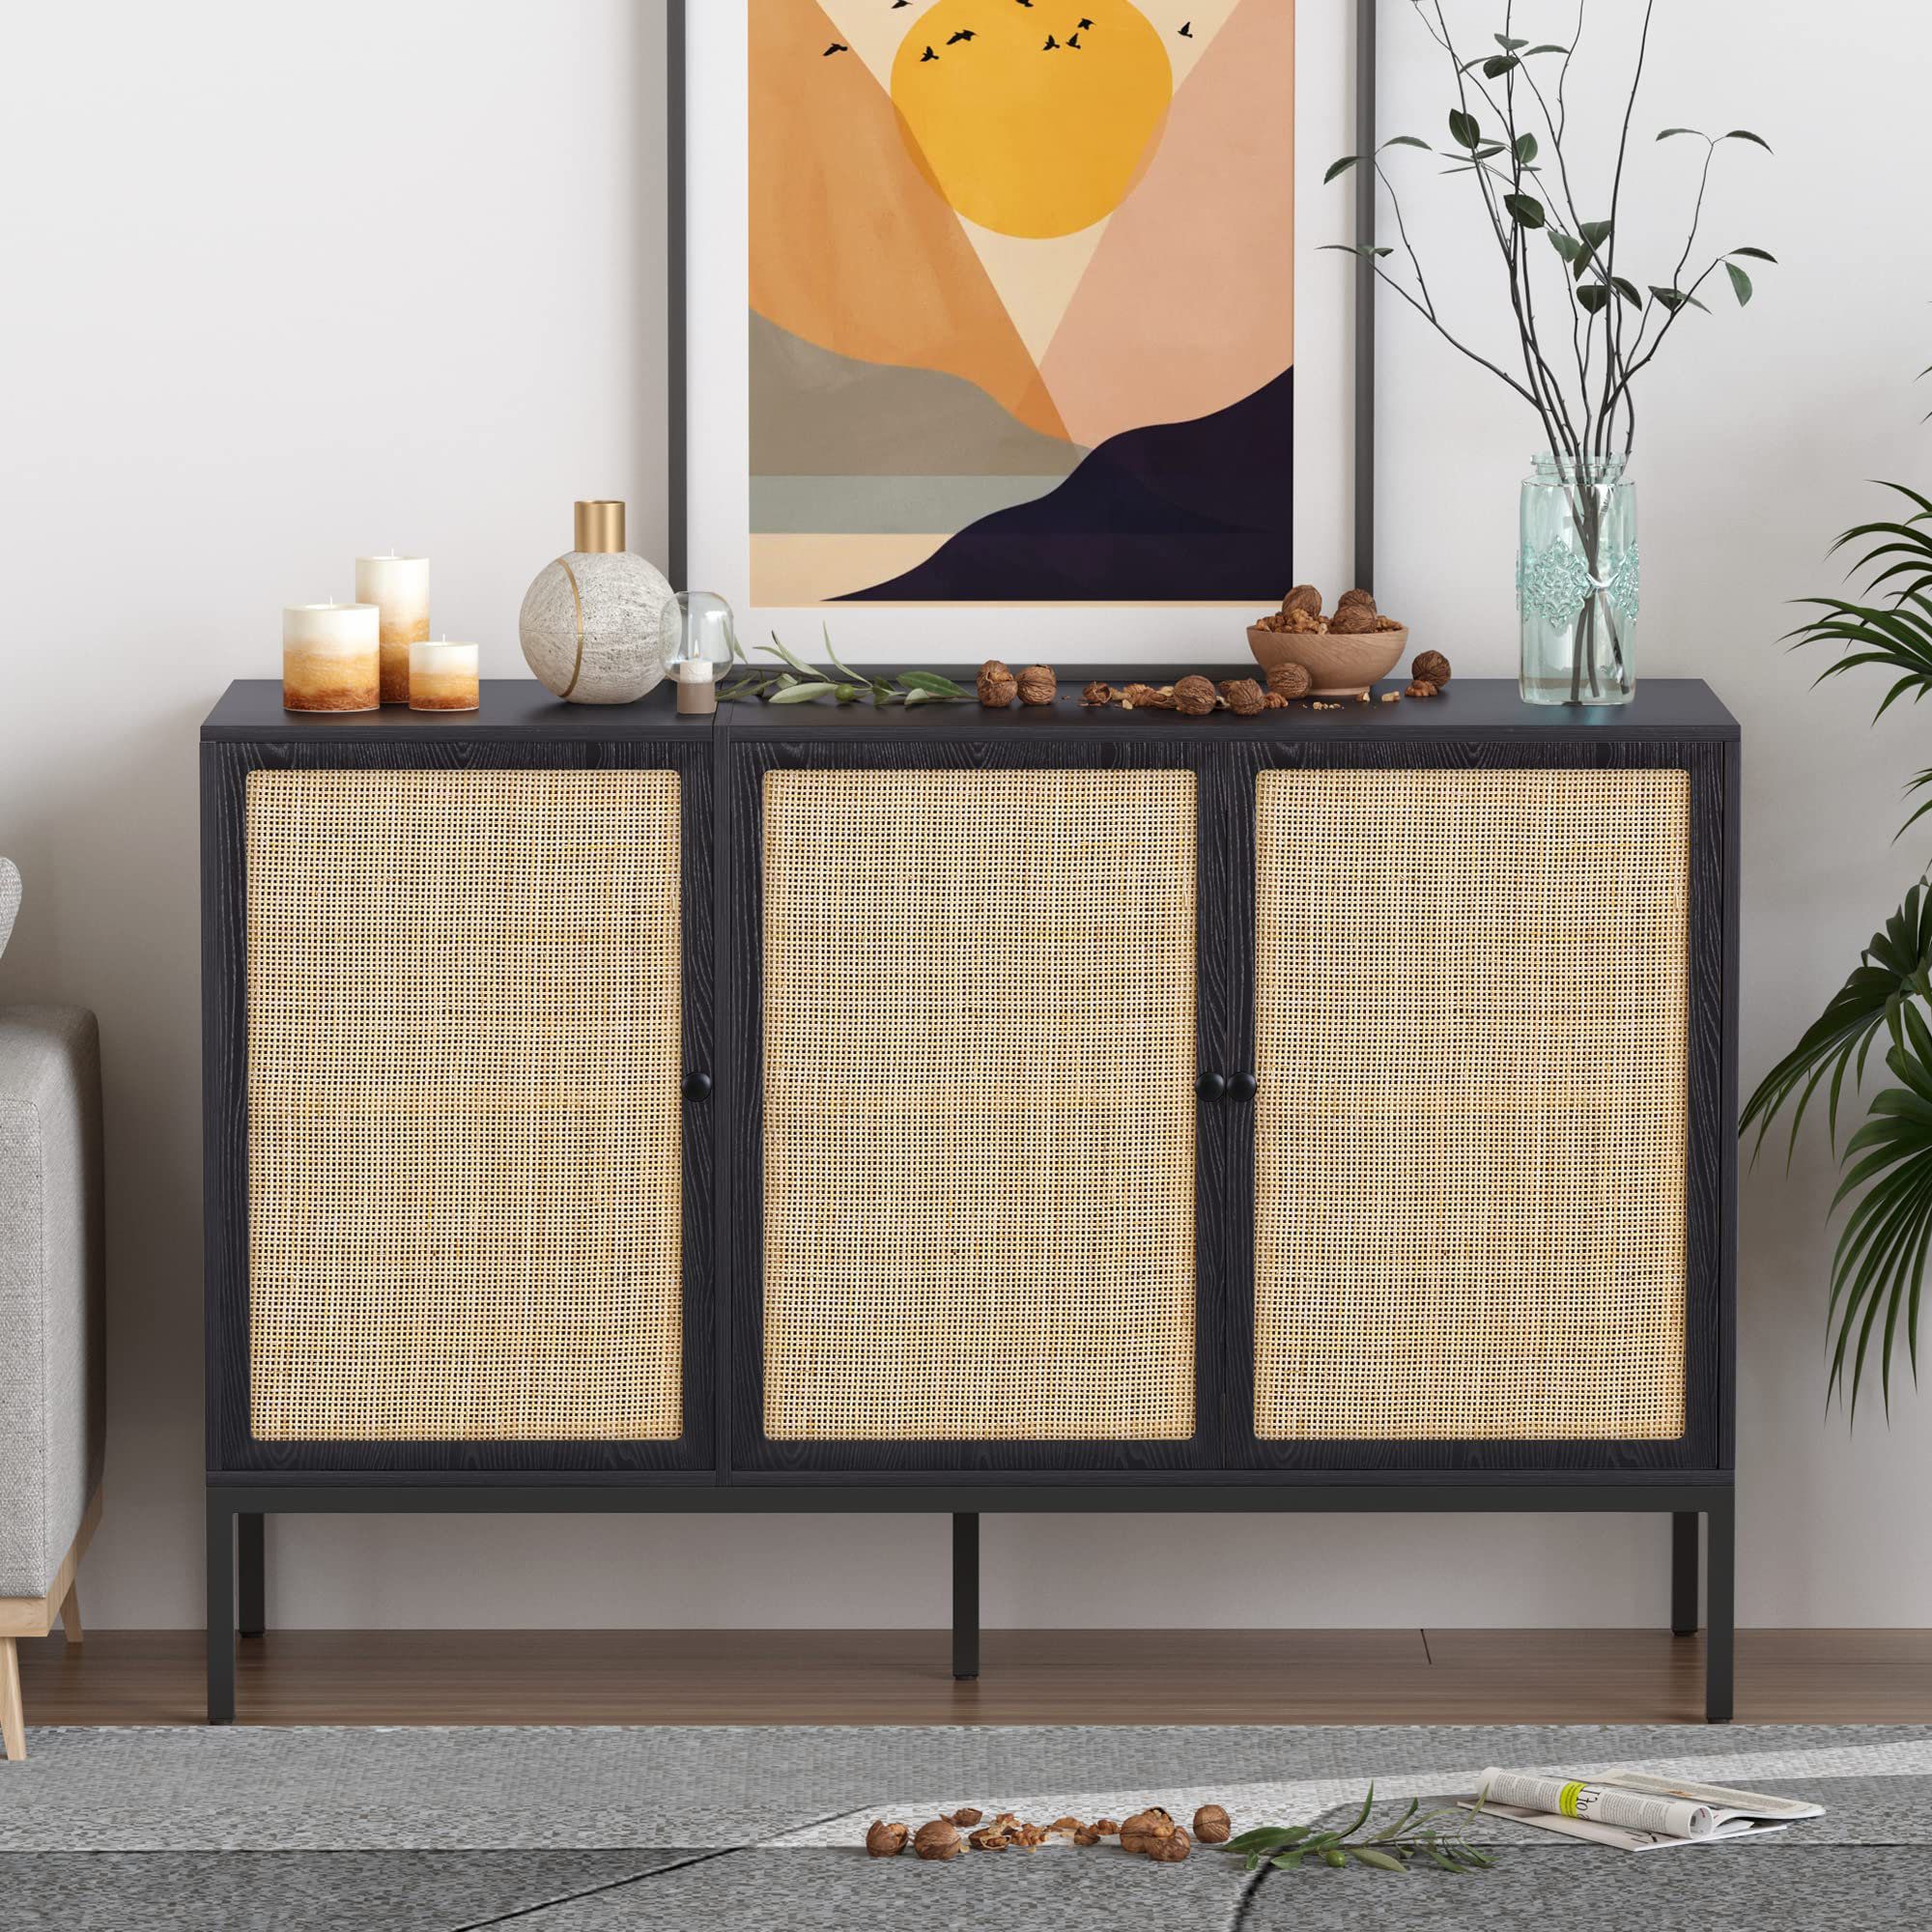 Bay Isle Home Boho Natural Rattan 47'' Wide Sideboard & Reviews | Wayfair Throughout Assembled Rattan Sideboards (Gallery 4 of 20)